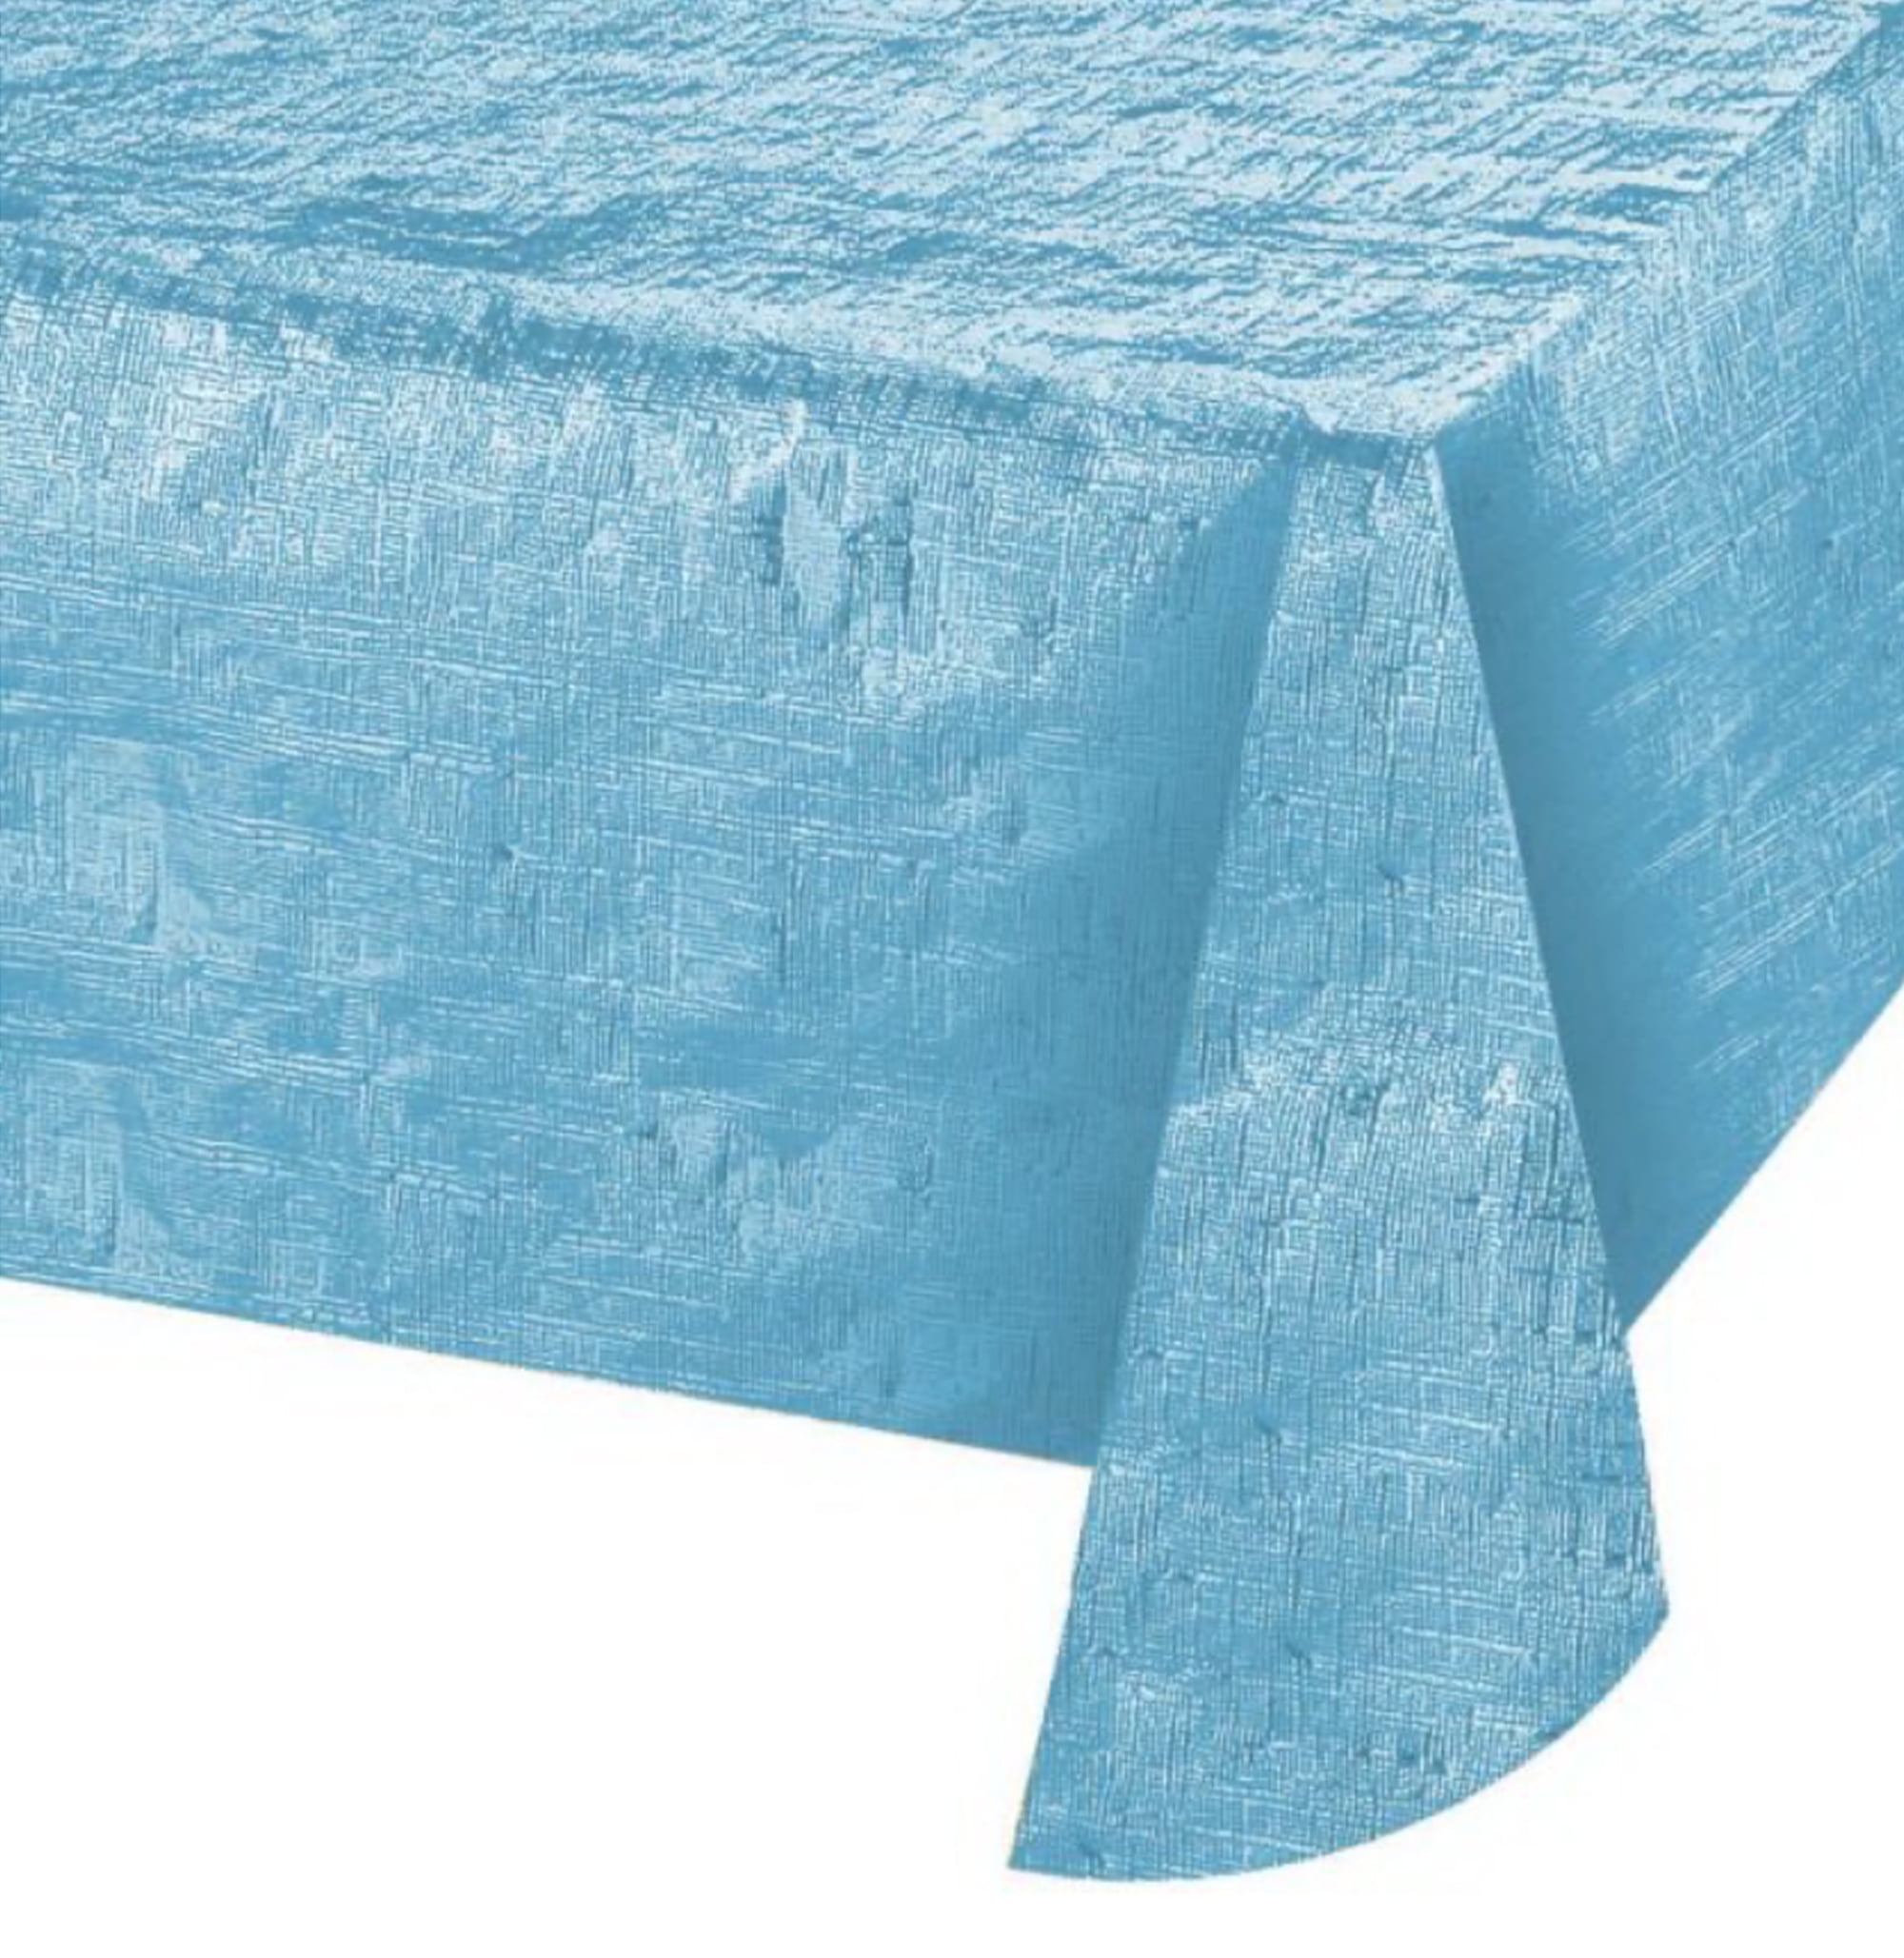 Way to Celebrate Blue Opalescent Metallic Paper Tablecloth, Party Supplies, 1 Ct., 54 in x 84 in, Size: 54 inch x 84 inch